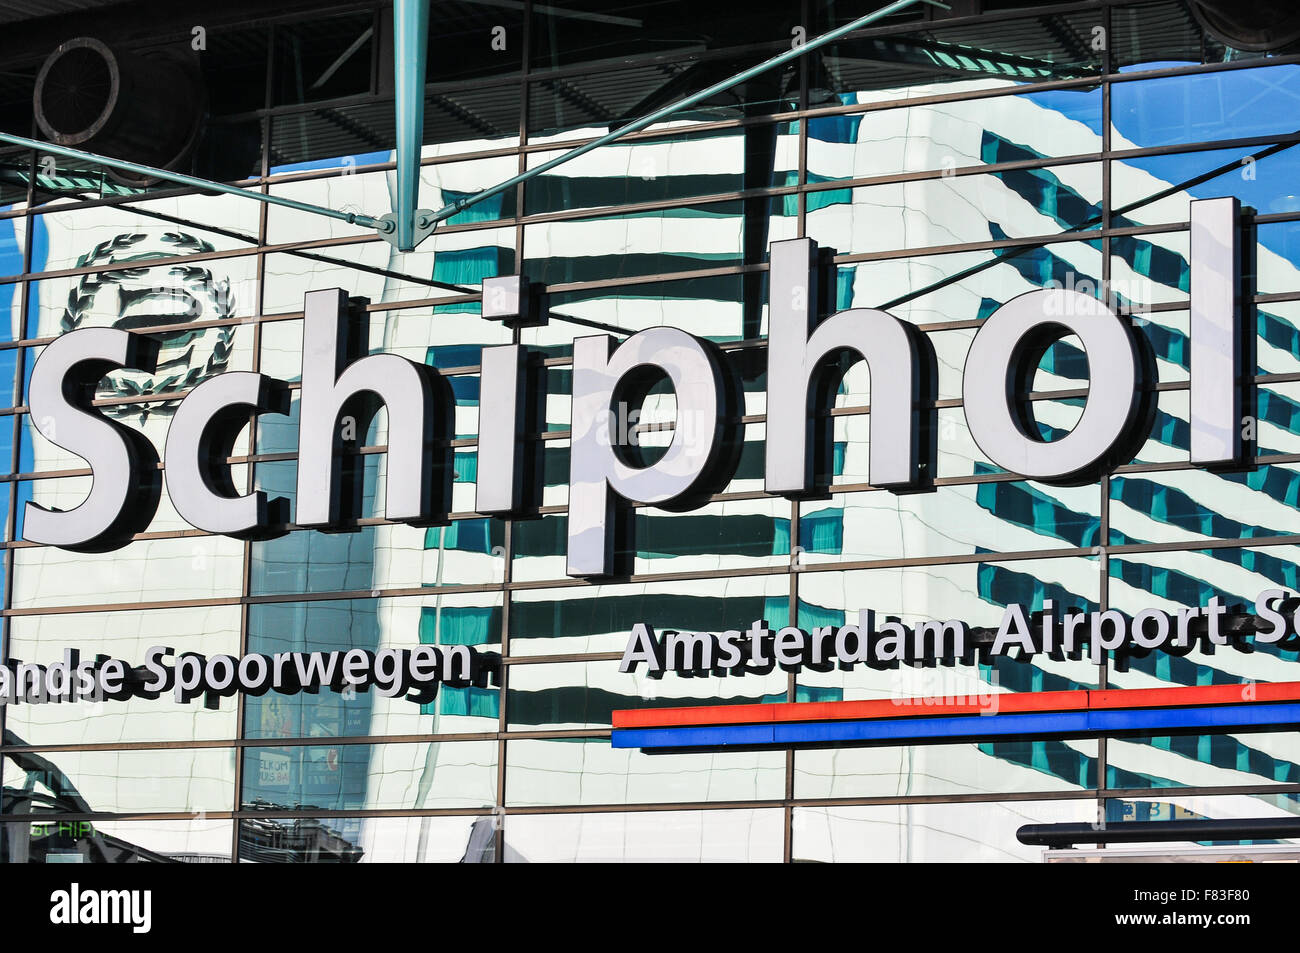 Schiphol the largest Airport in The Netherlands located in Amsterdam. Stock Photo